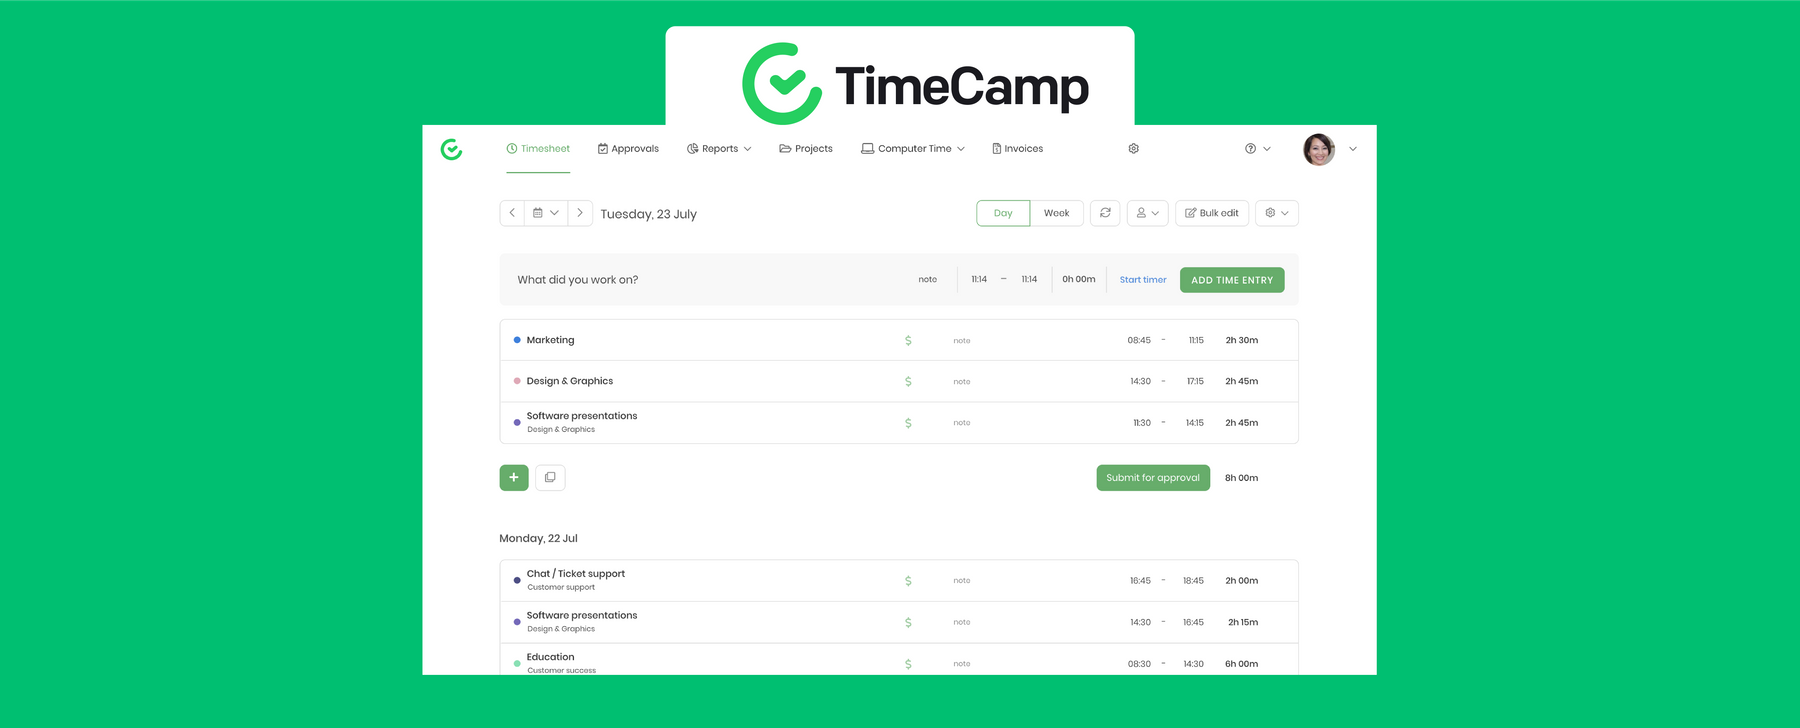 TimeCamp Review 2021:Features, Pricing, Pros & Cons